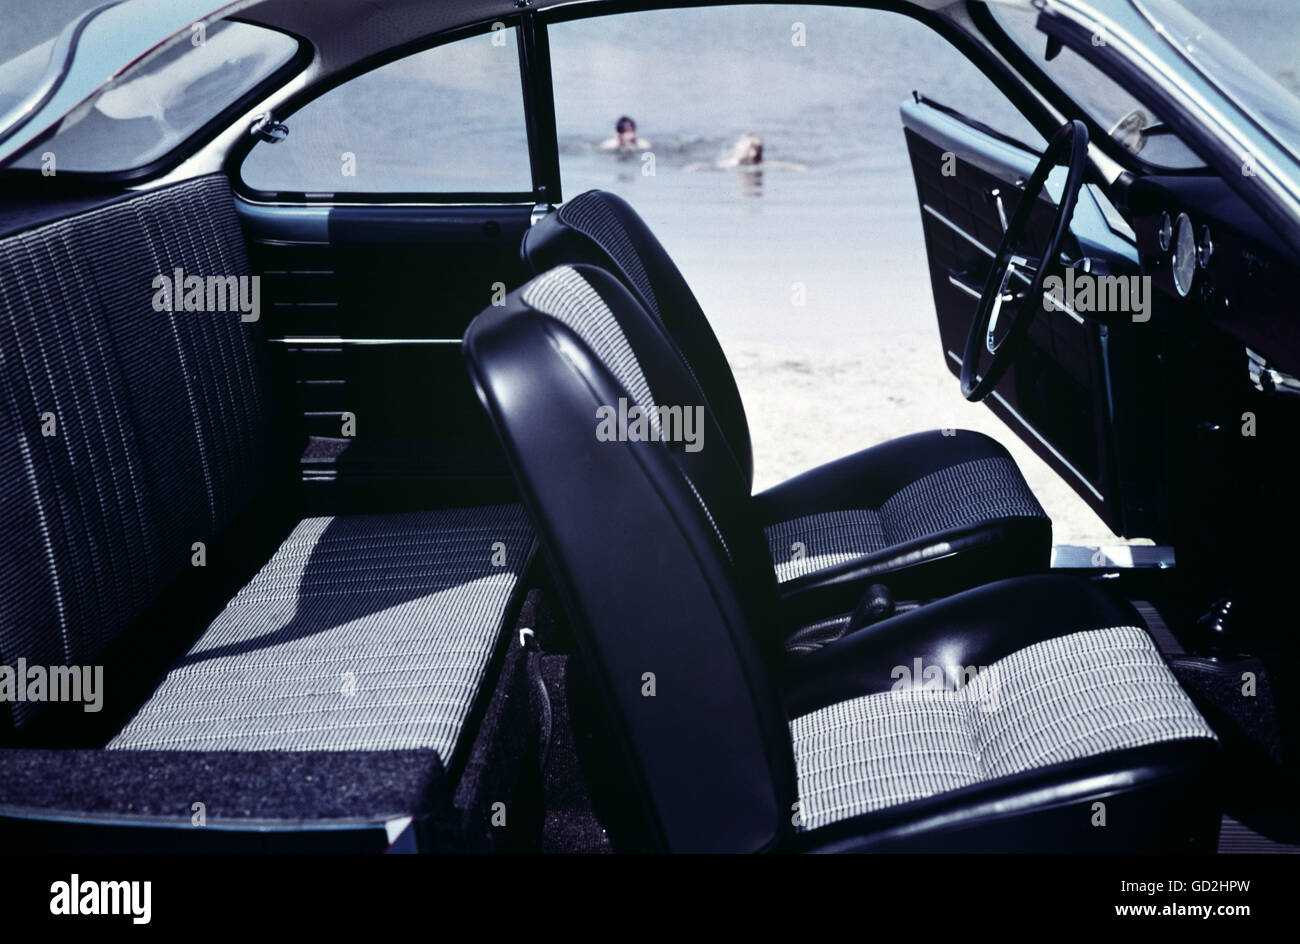 transport / transportation, cars, Volkswagen, VW 1600 Karmann-Ghia coupe, type 34, interior view, seats, Germany, late 1960s, Additional-Rights-Clearences-Not Available Stock Photo